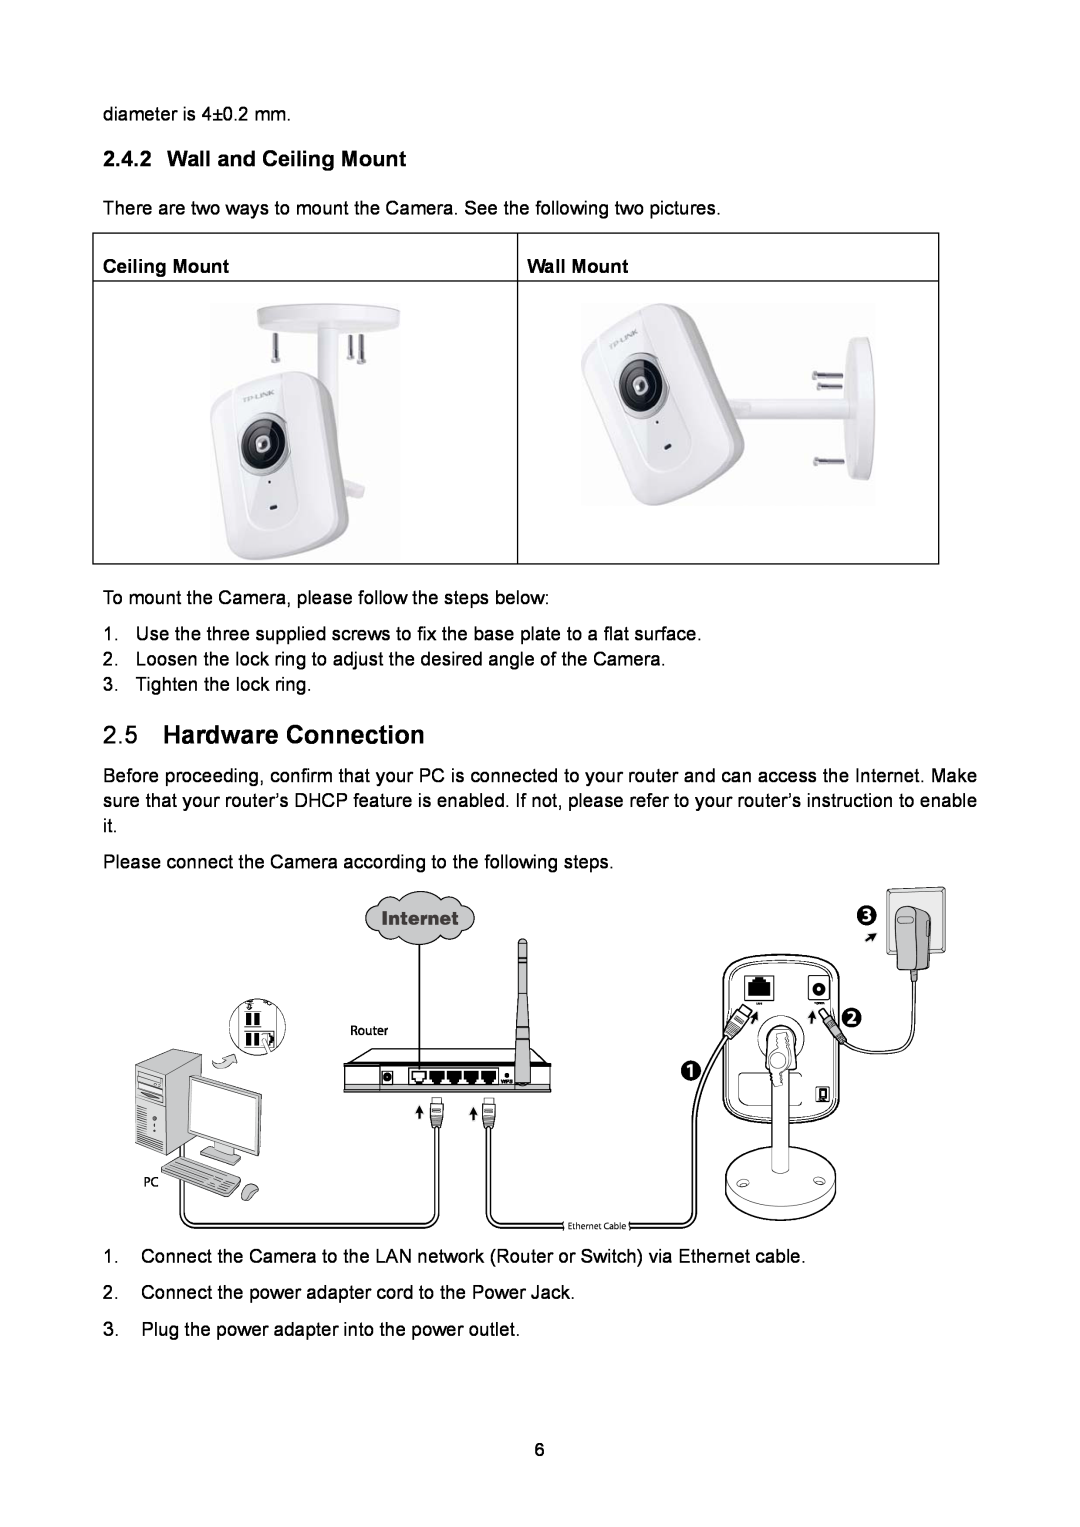 TP-Link TL-SC2020 manual Hardware Connection, Wall and Ceiling Mount 